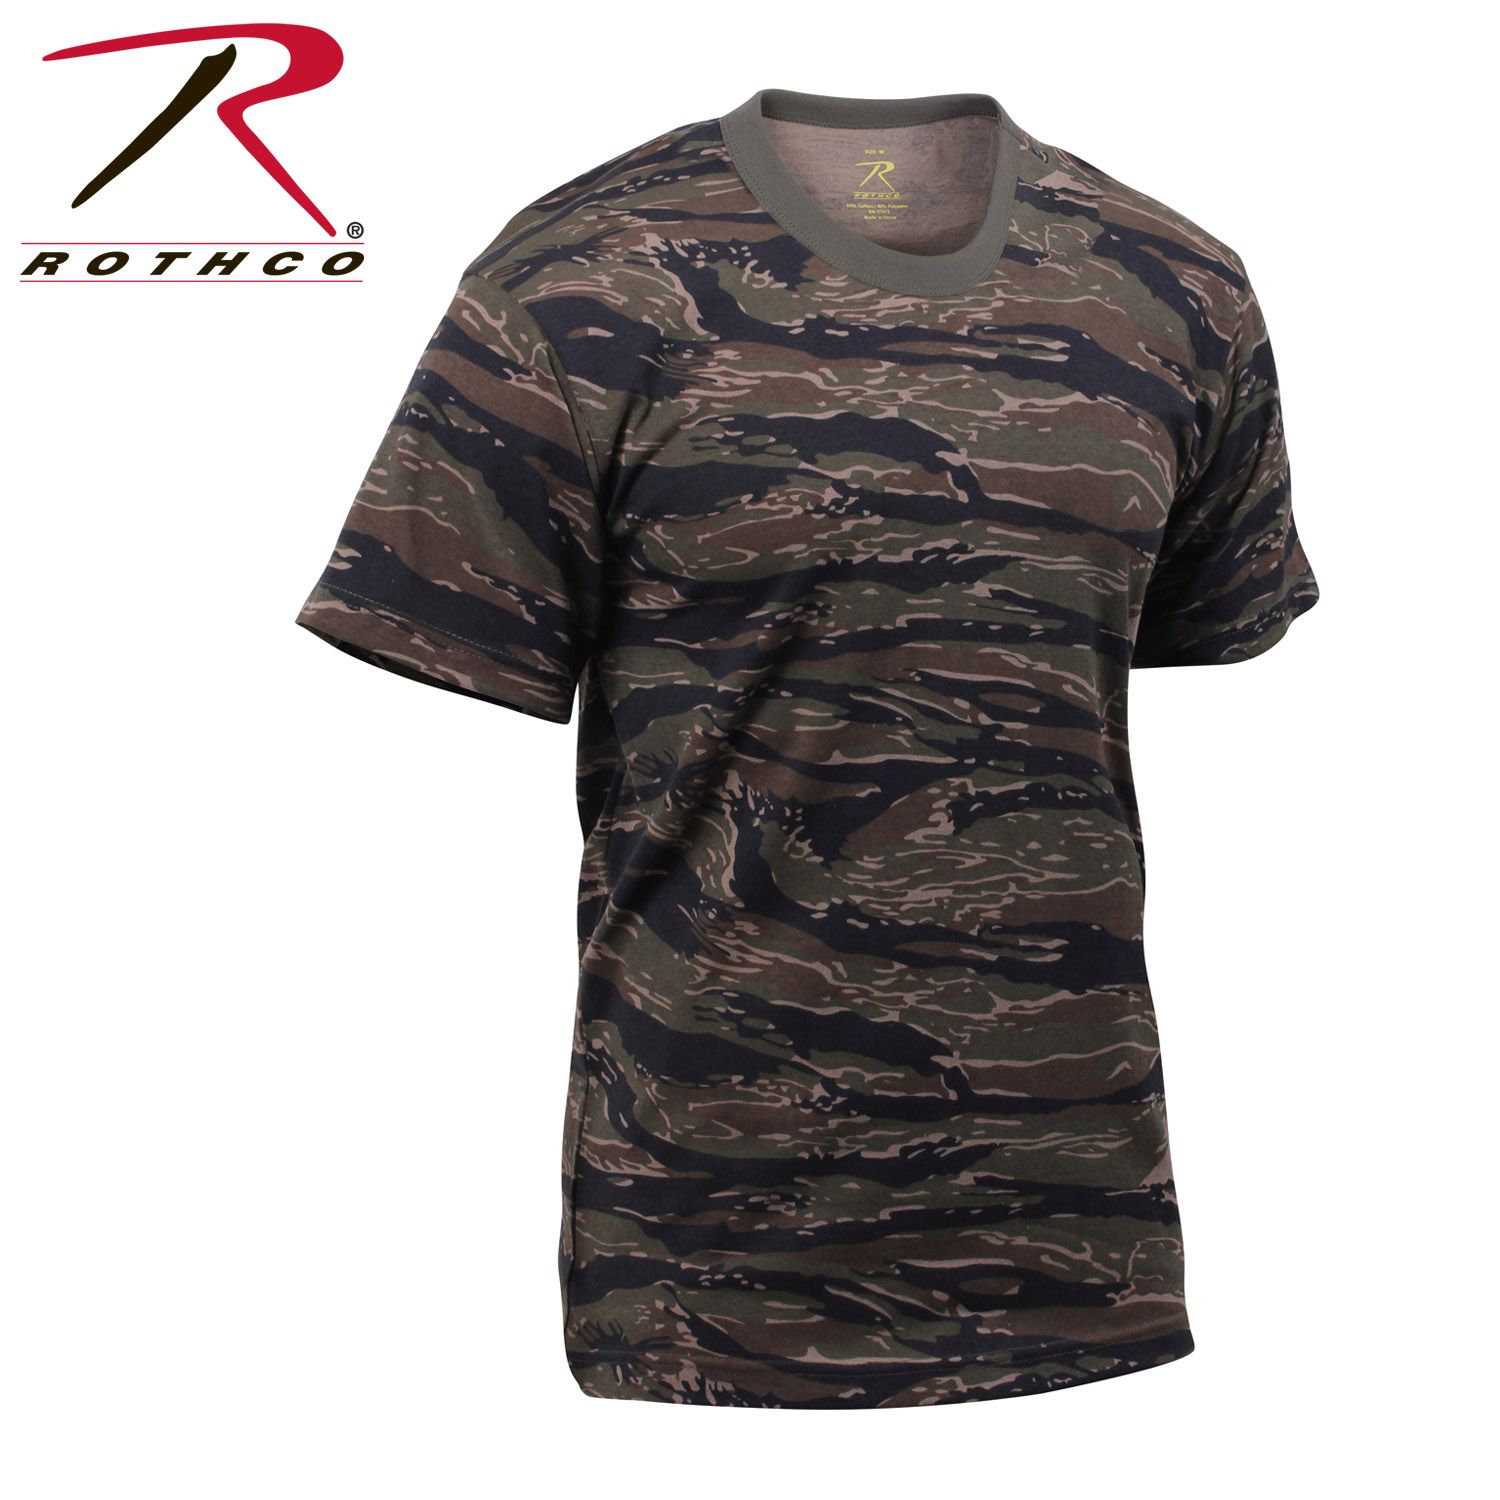 Buy Rothco Tiger Stripe Camo T Shirts Rothco Online At Best